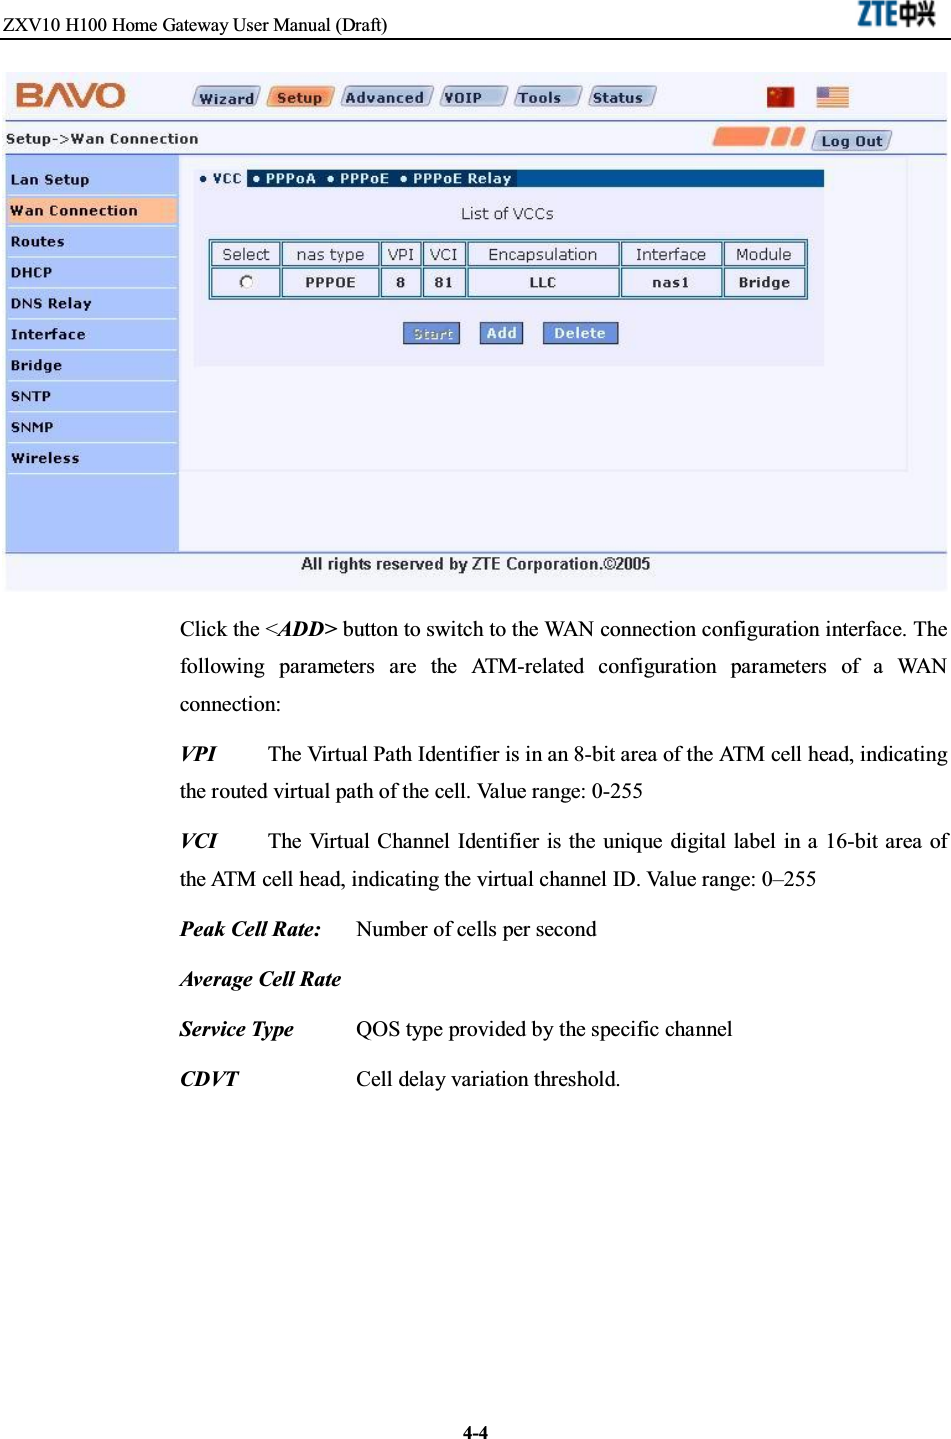 ZXV10 H100 Home Gateway User Manual (Draft)4-4Click the &lt;ADD&gt; button to switch to the WAN connection configuration interface. Thefollowing parameters are the ATM-related configuration parameters of a WANconnection:VPI The Virtual Path Identifier is in an 8-bit area of the ATM cell head, indicatingthe routed virtual path of the cell. Value range: 0-255VCI The Virtual Channel Identifier is the unique digital label in a 16-bit area ofthe ATM cell head, indicating the virtual channel ID. Value range: 0–255Peak Cell Rate: Number of cells per secondAverage Cell RateService Type QOS type provided by the specific channelCDVT Cell delay variation threshold.